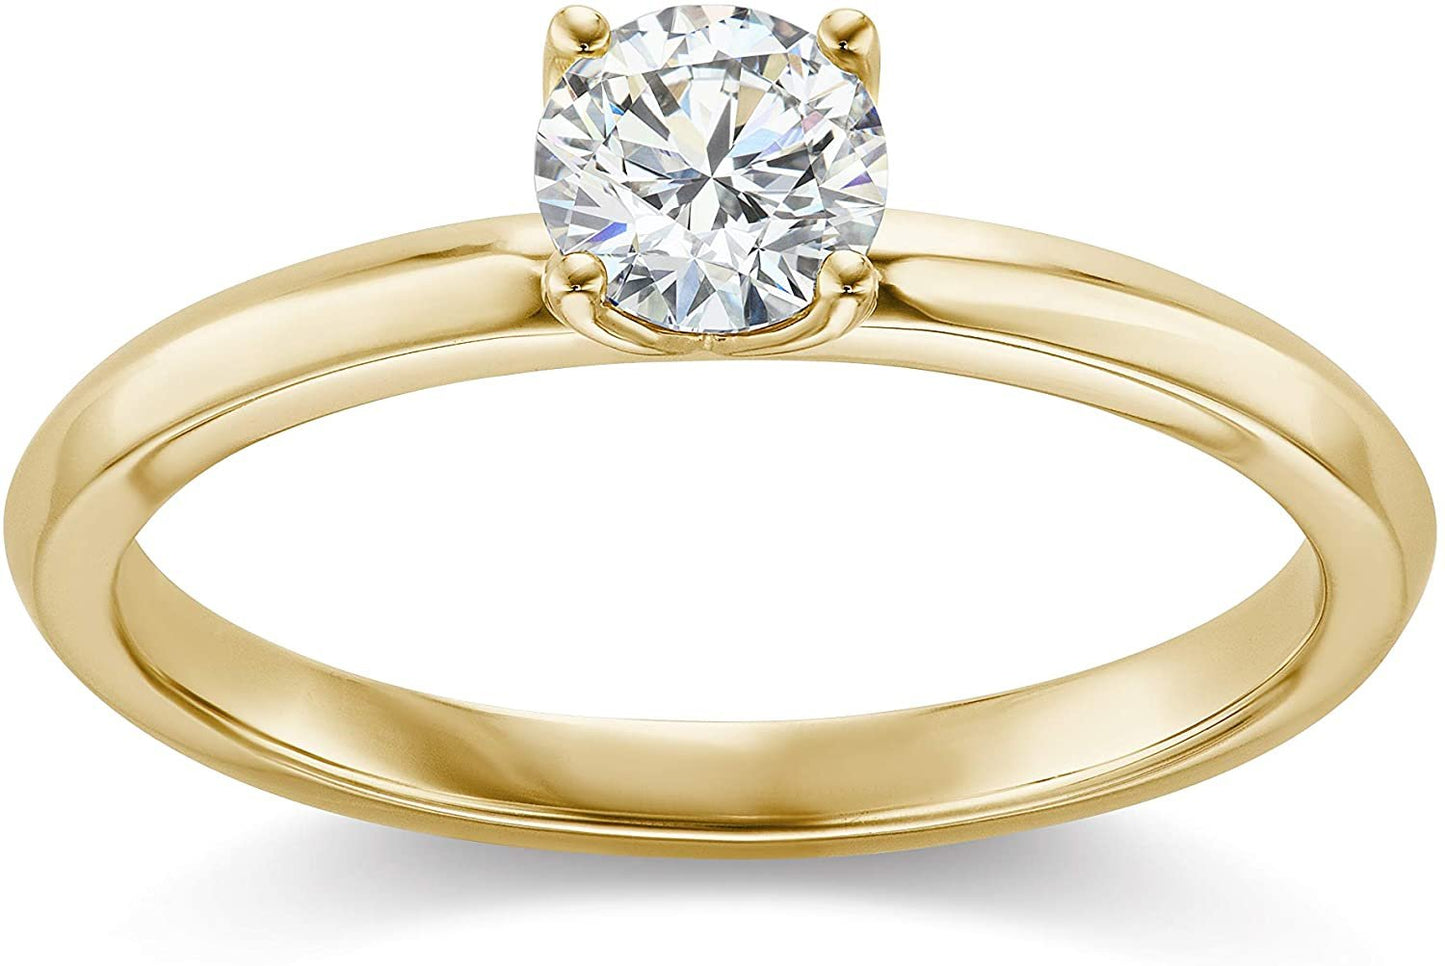 IGI Certified 2.0 Carat Round Brilliant-Cut Lab Created Diamond 14K Gold Classic 4-Prong Solitaire Engagement Ring (G-H Color, VS1-VS2 Clarity) - 14K Yellow Gold, Size 7-3/4